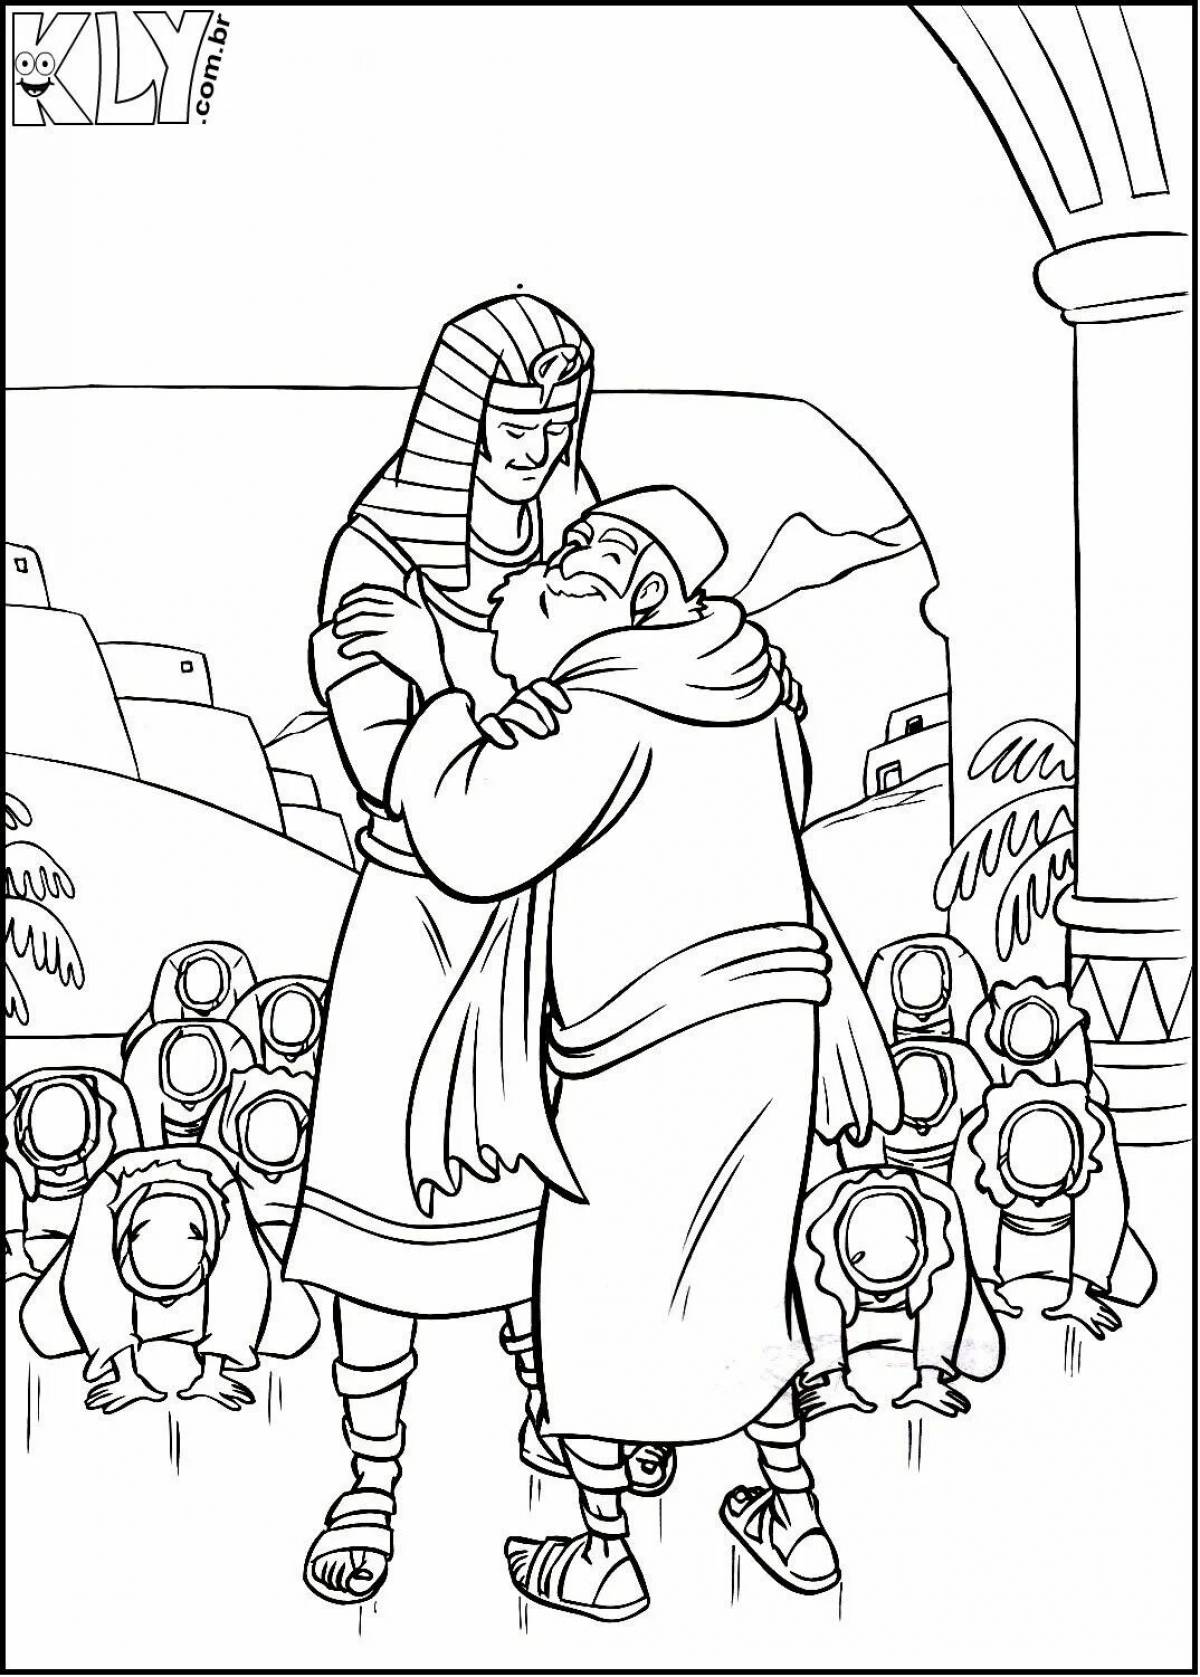 Colourfully made joseph in egypt coloring book